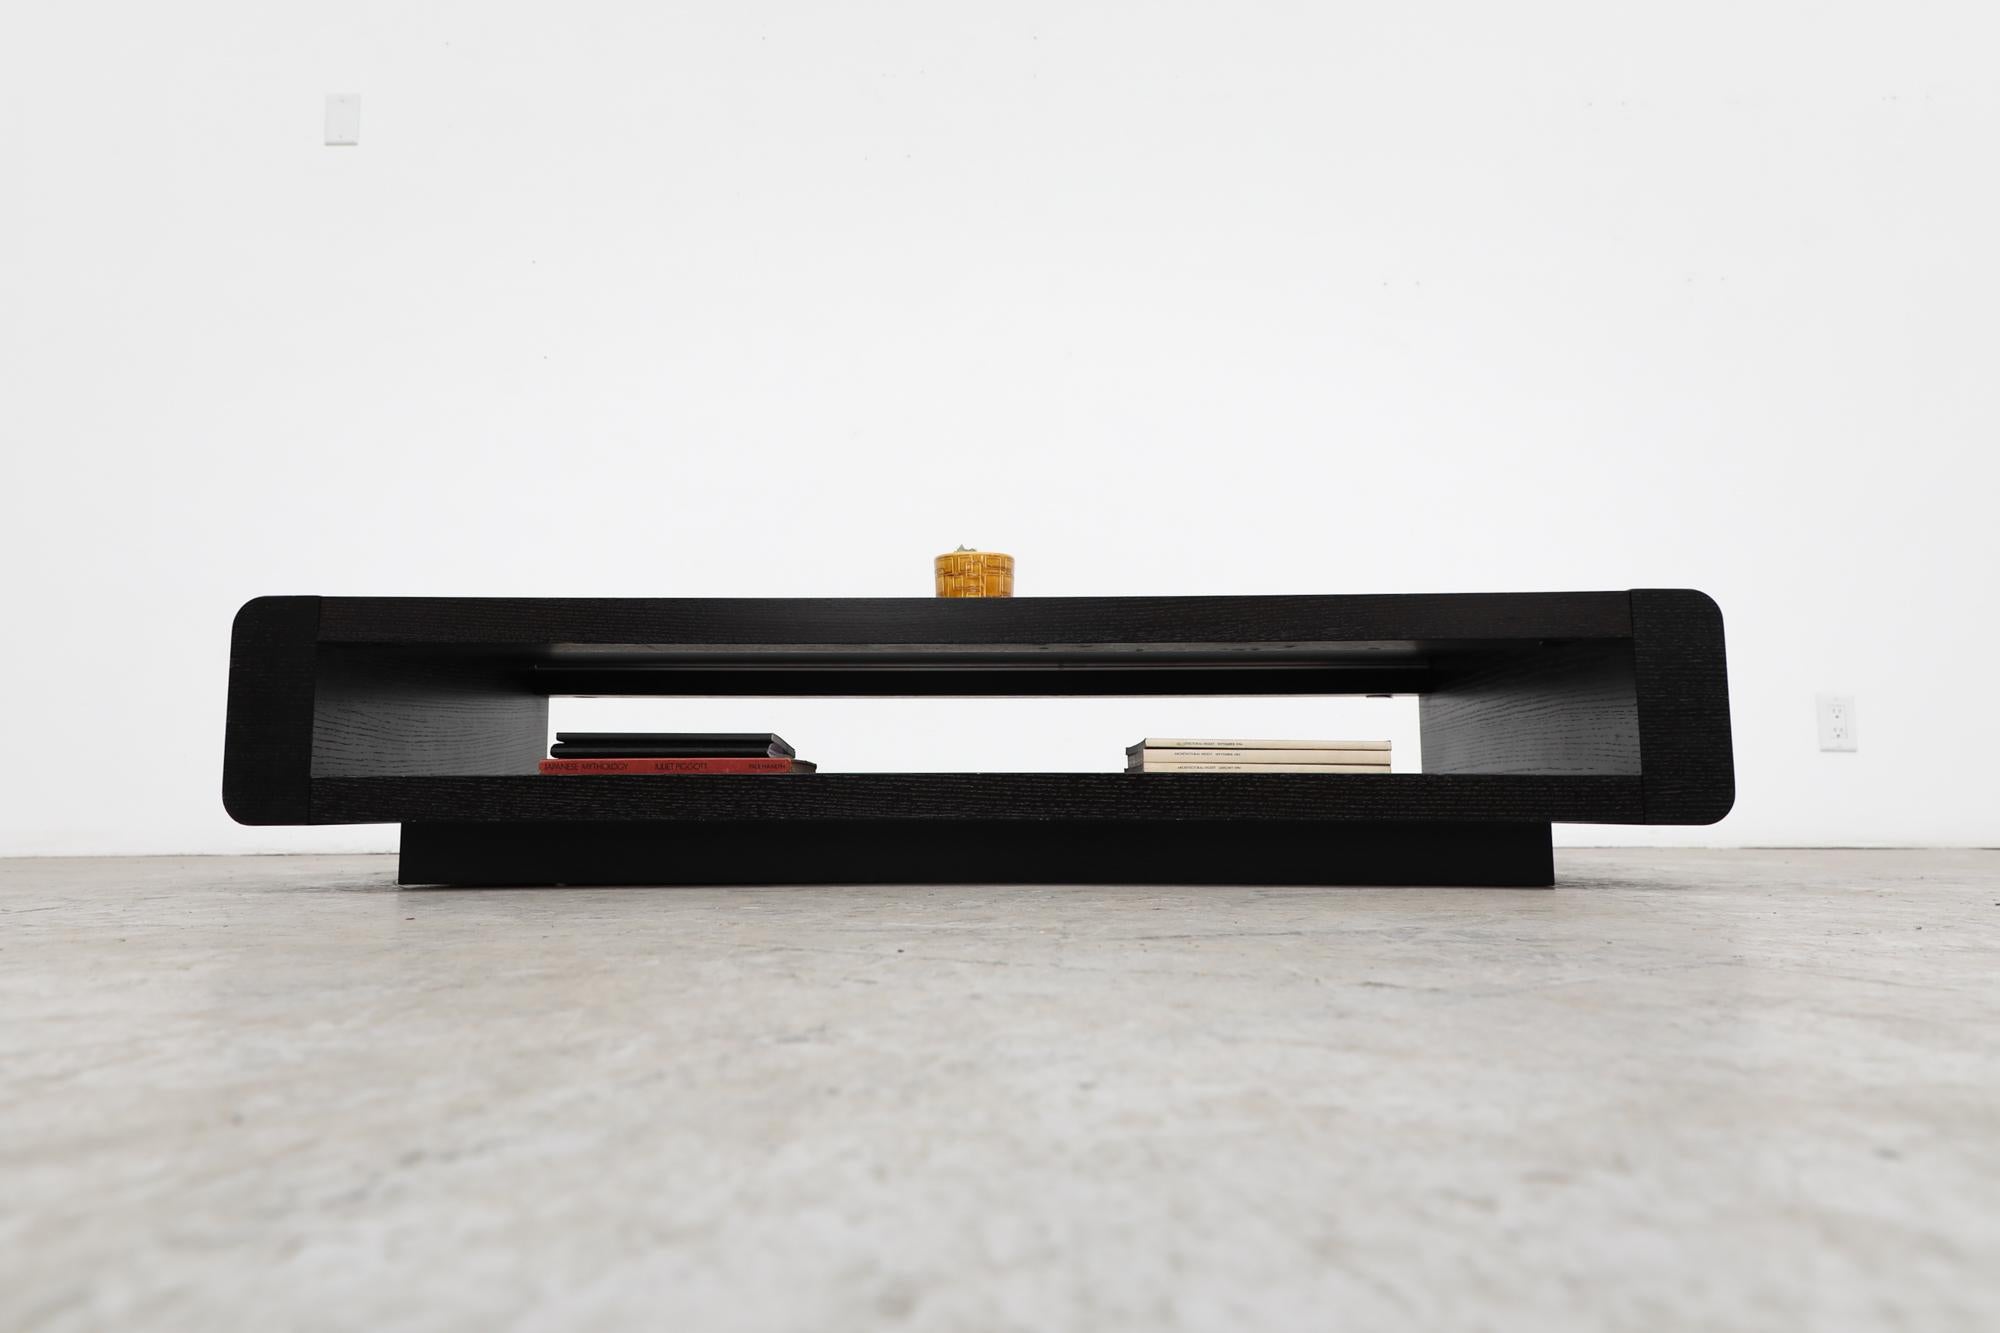 Maneval style low and stealth 1970's dark wenge coffee table with inset black back painted glass top and lower magazine and book shelf. In original condition with visible wear, including heavy scratching to the black glass. Wear is consistent with